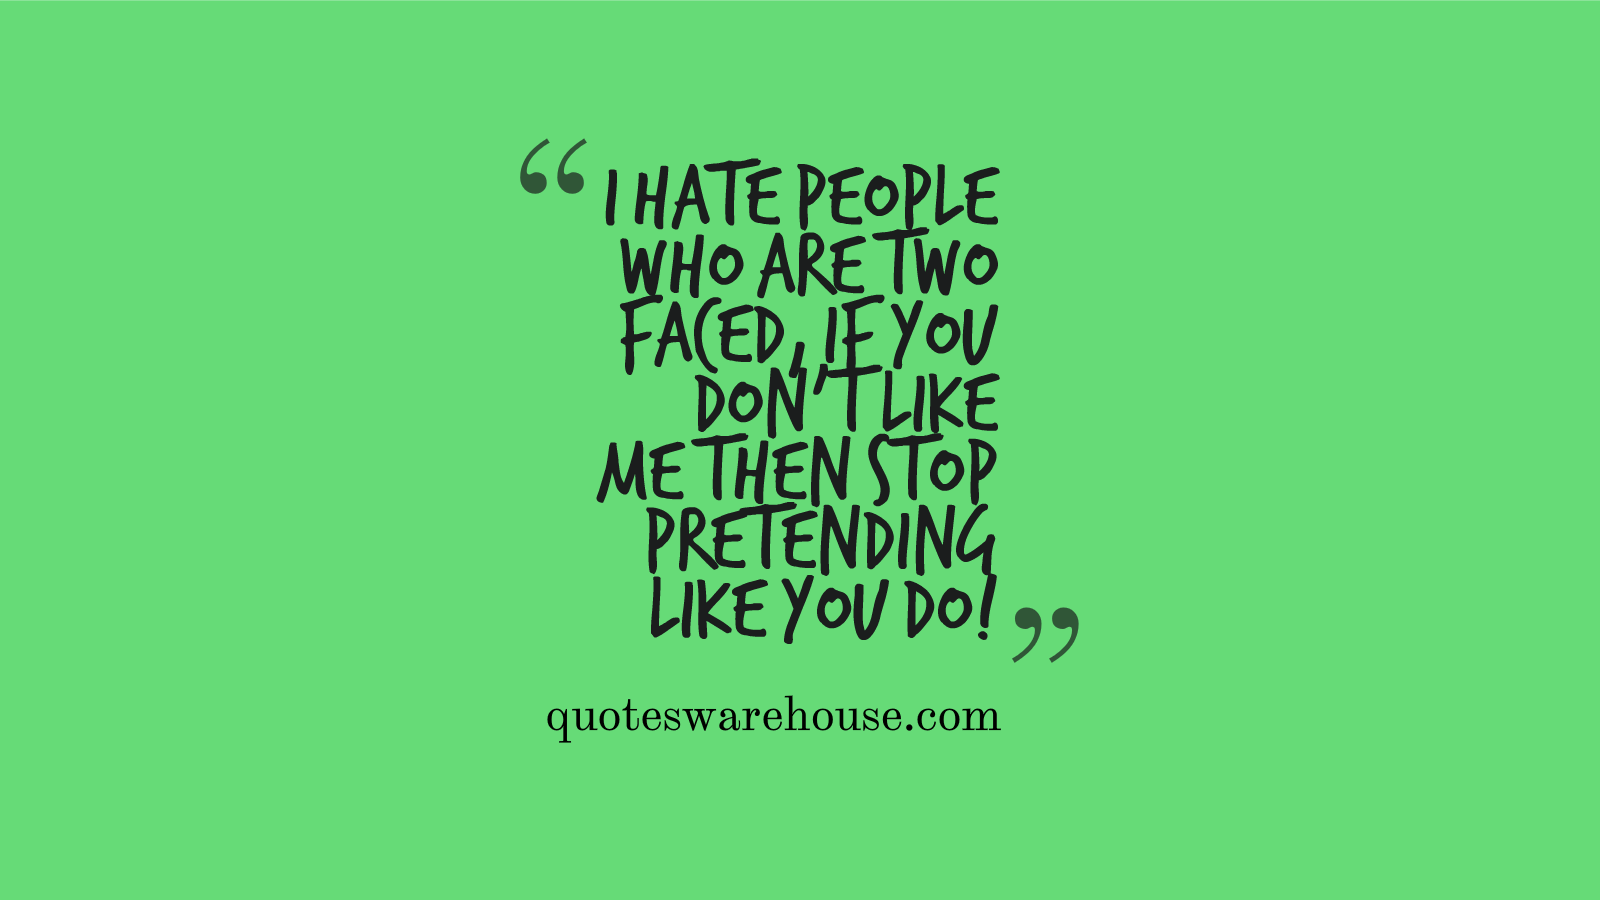 fake people quotes covers